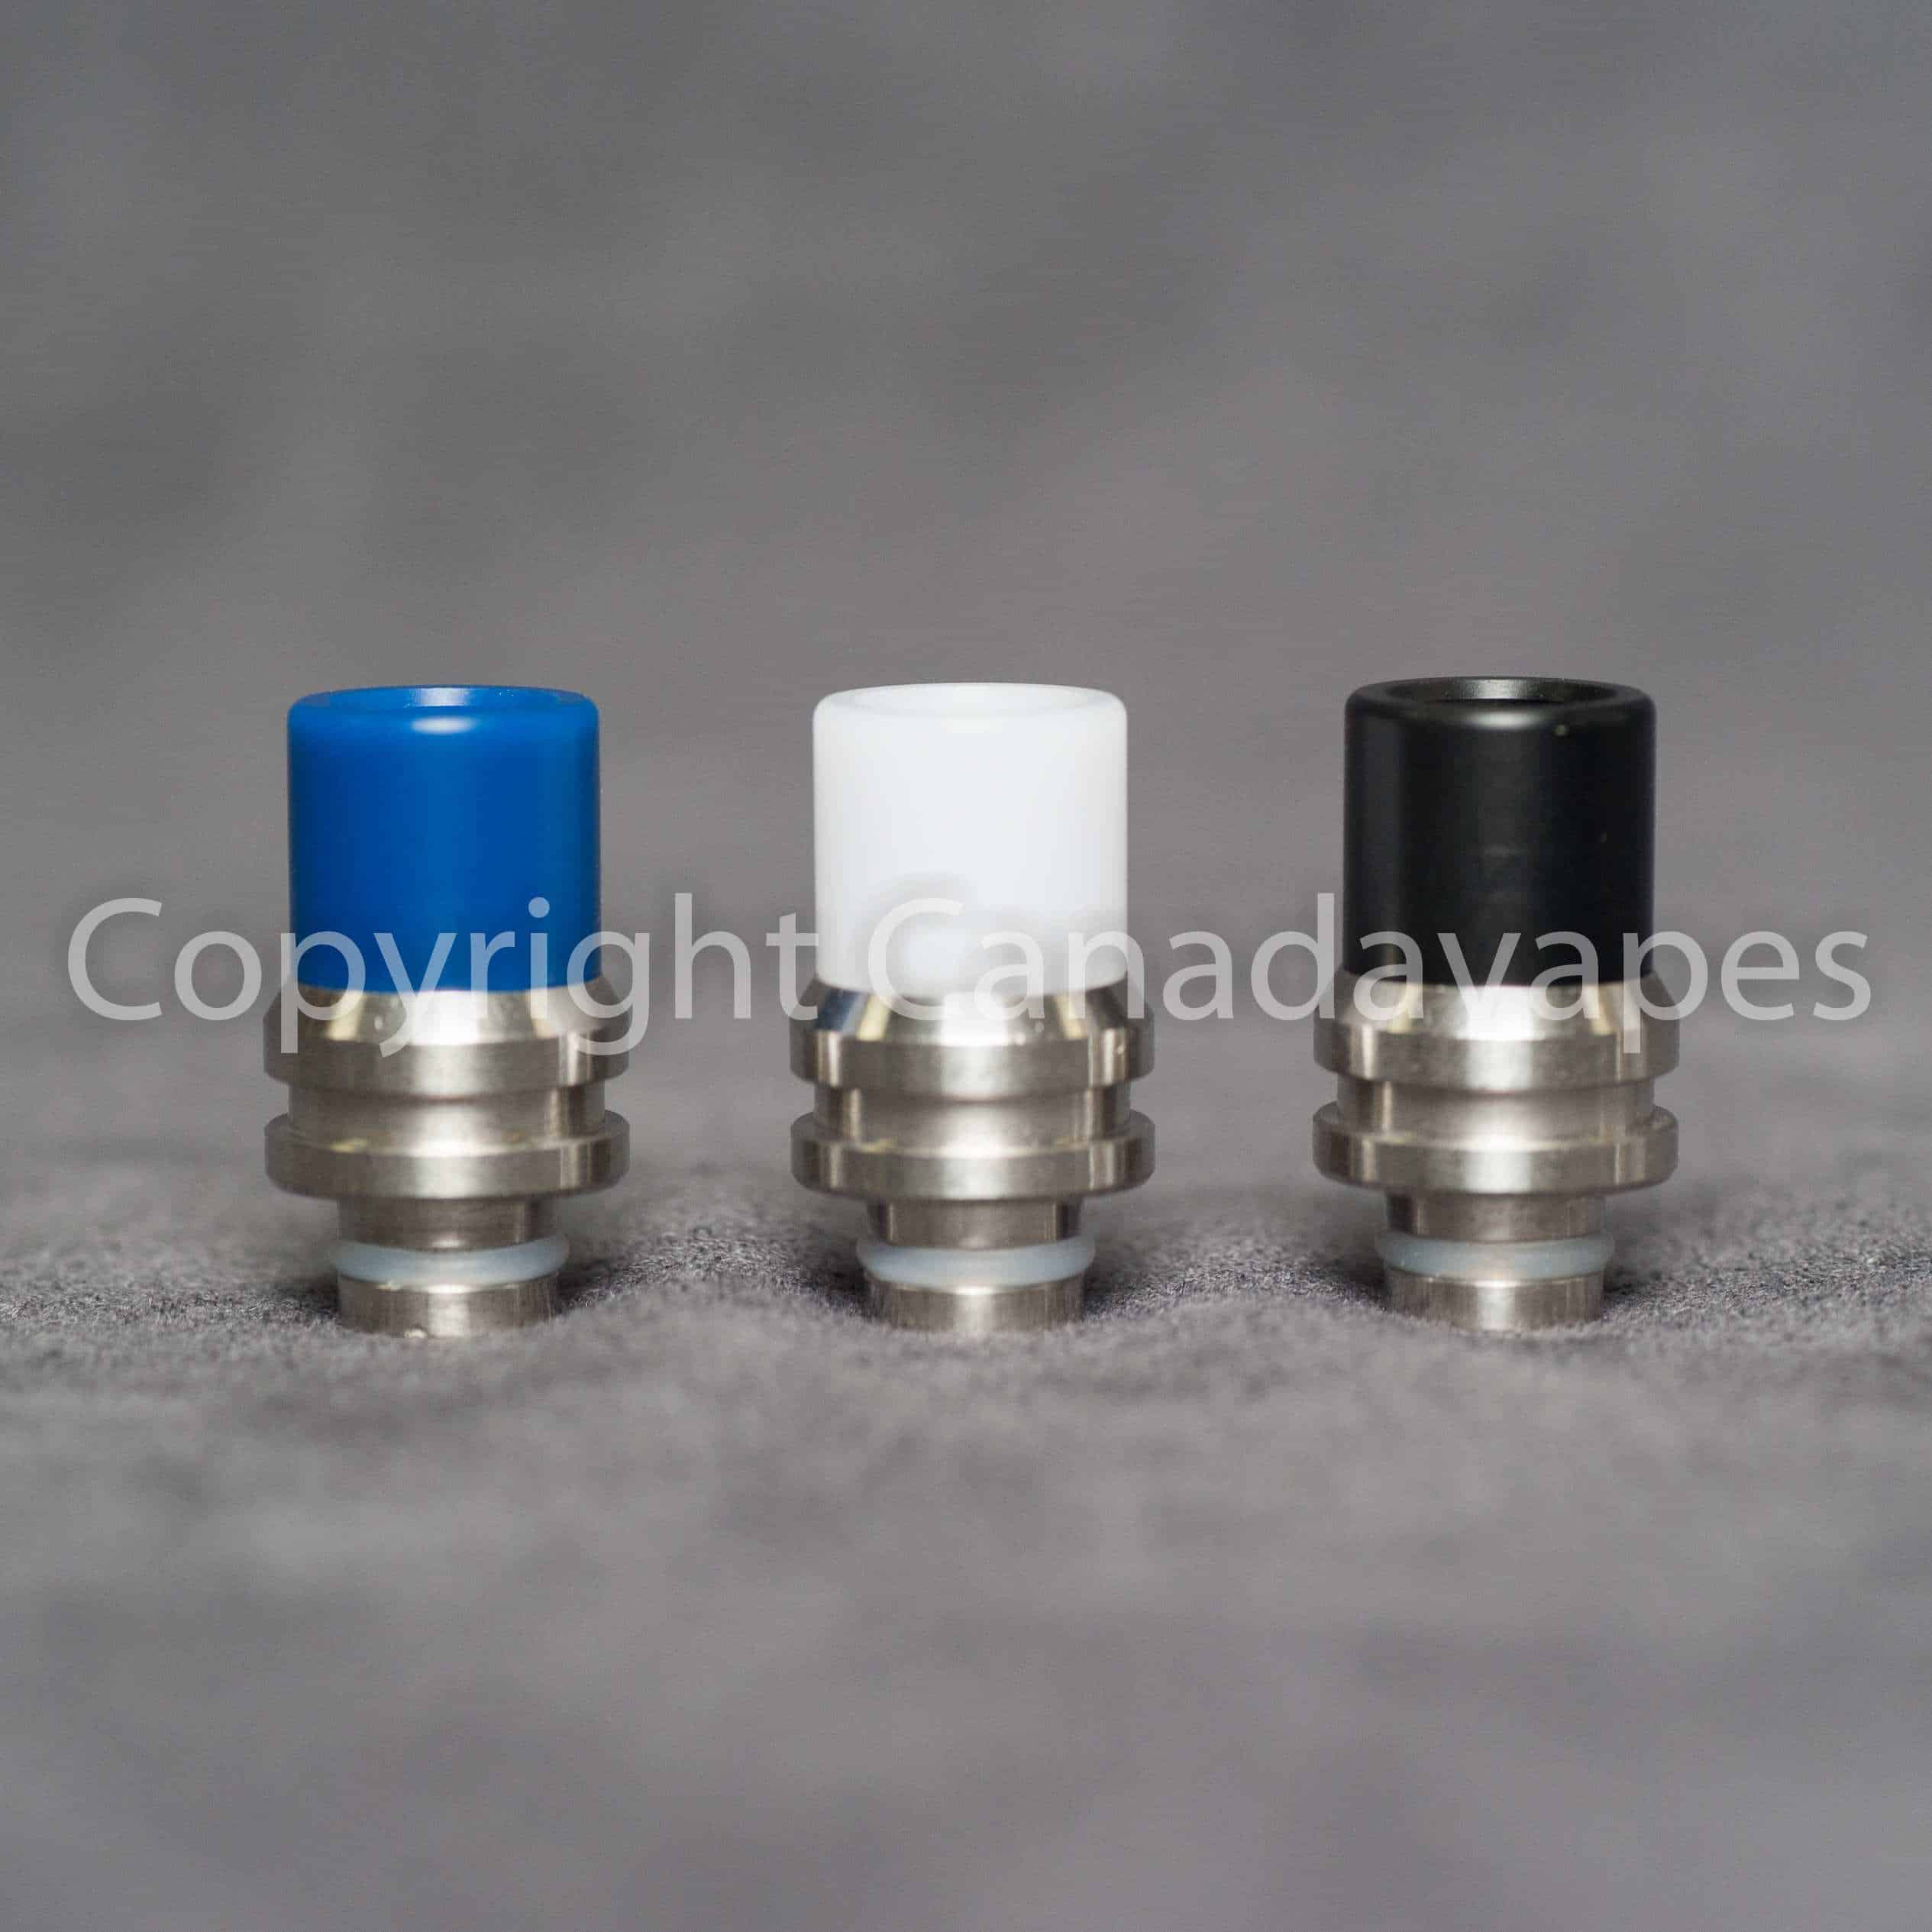 Mouthpiece Accessories